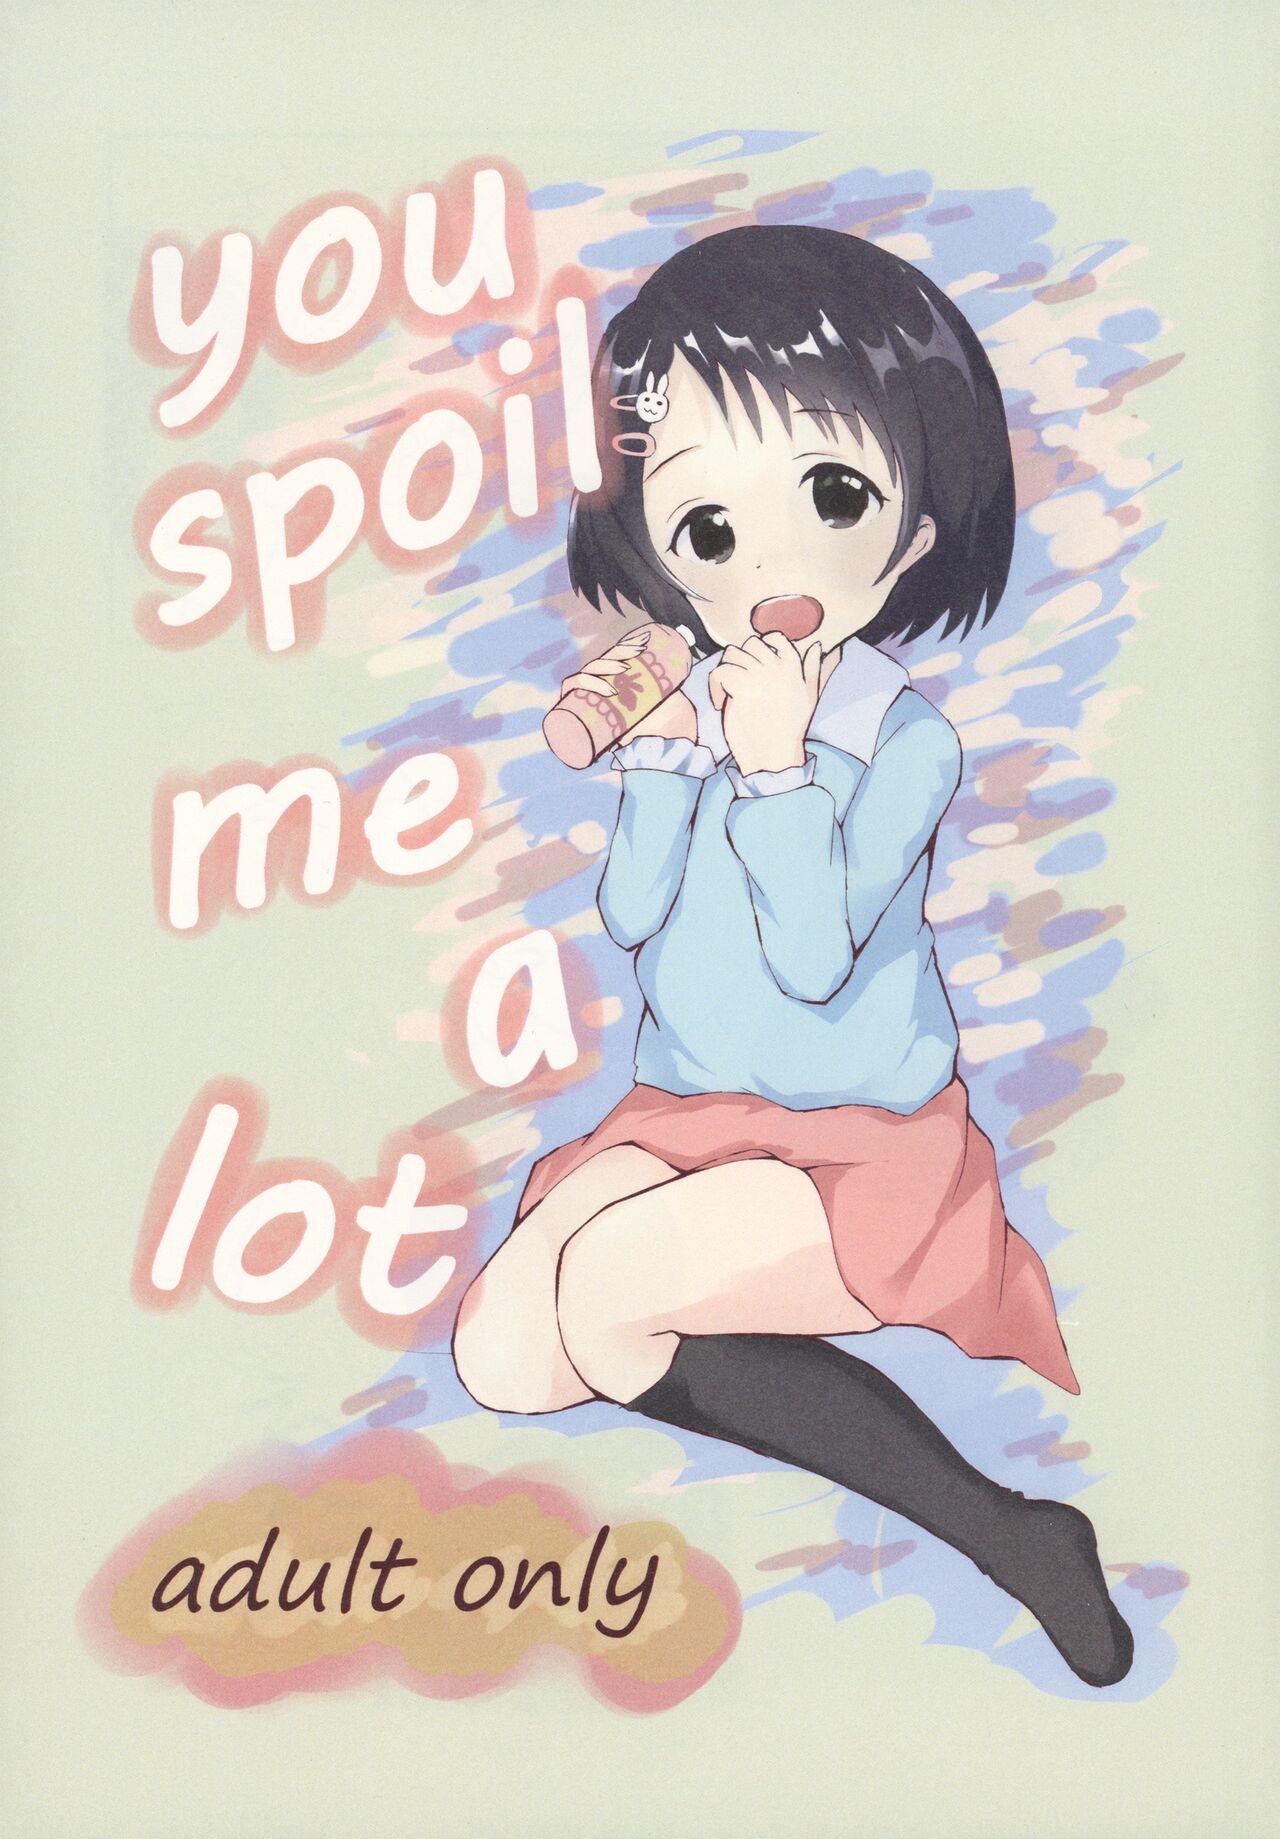 Cruising you spoil me a lot - The idolmaster 18yearsold - Picture 1